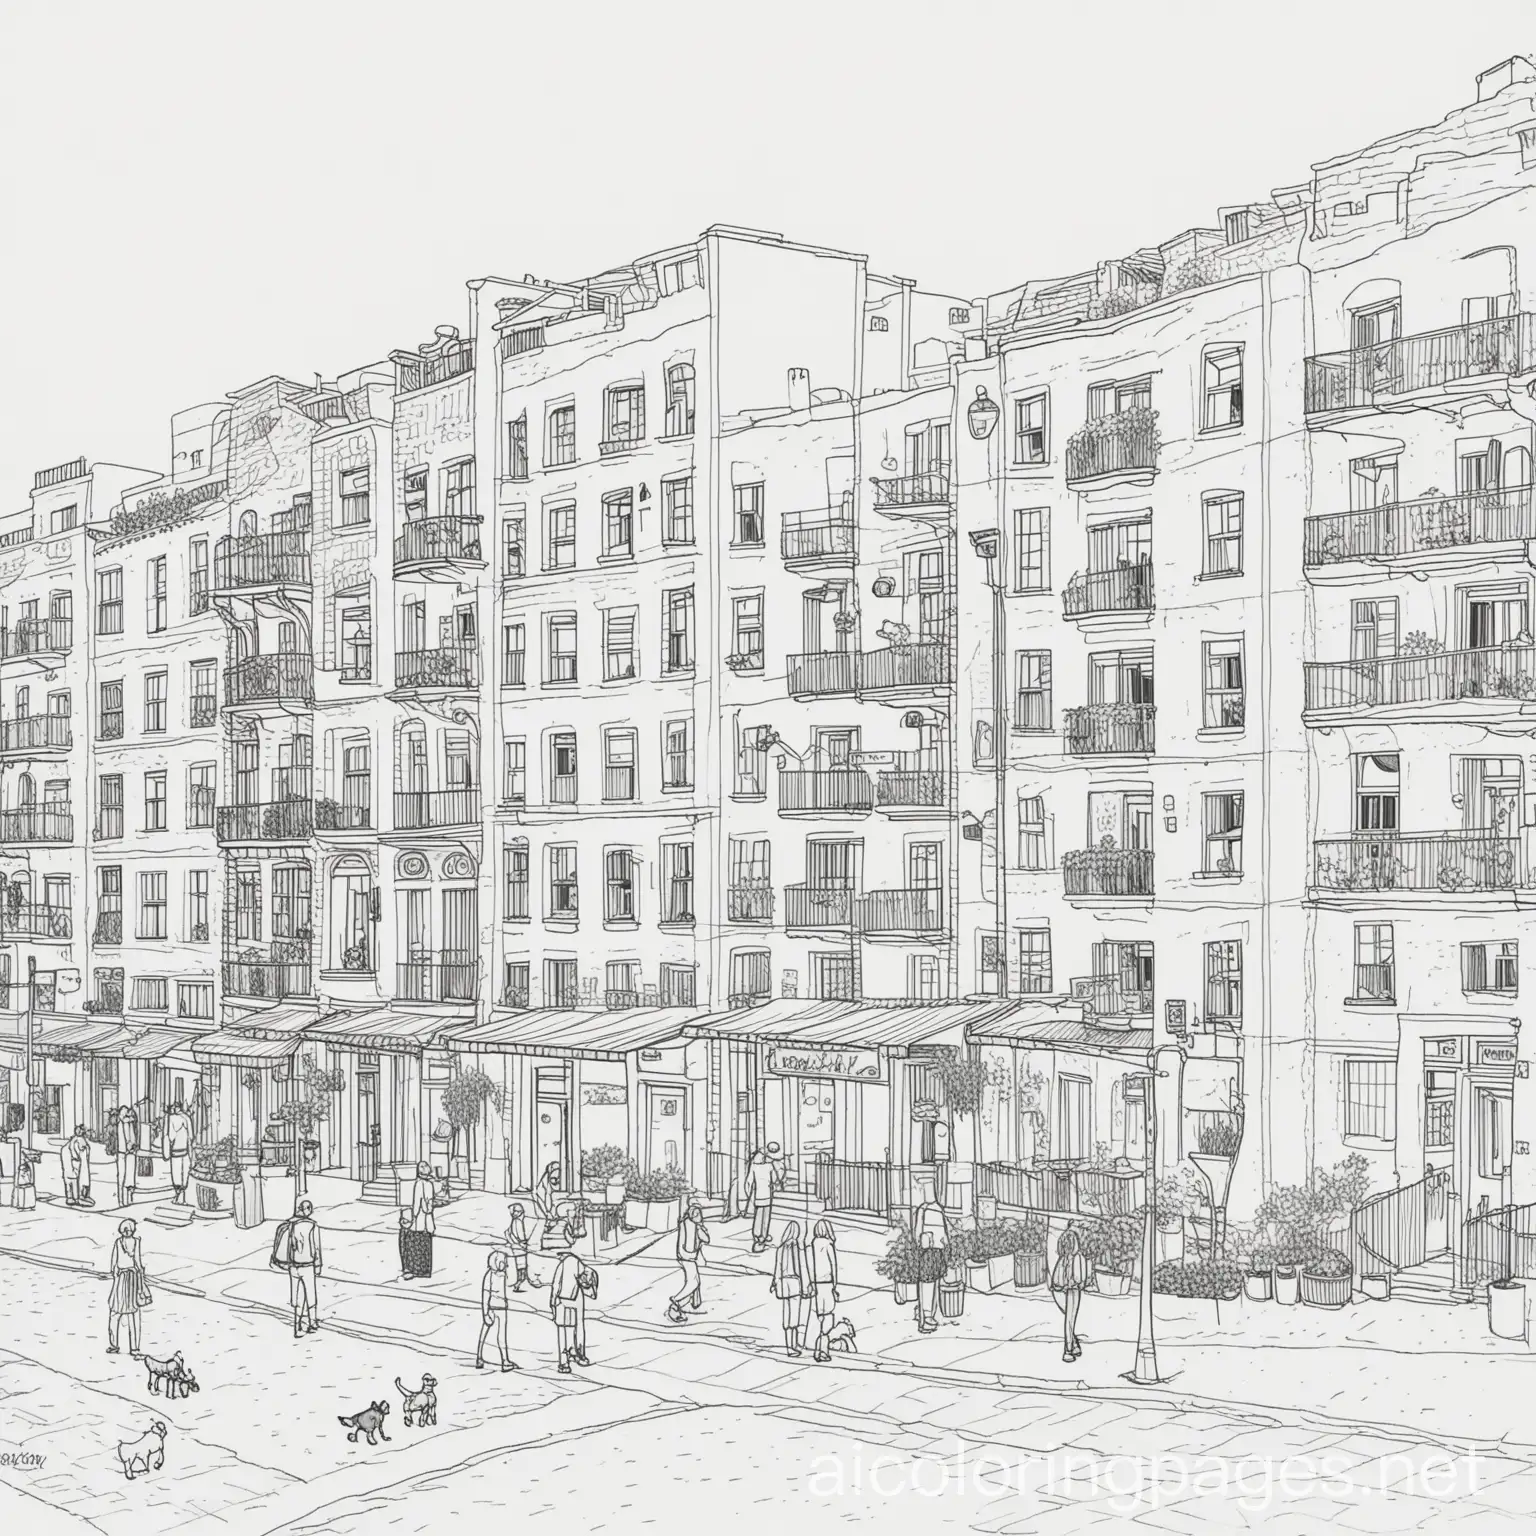 apartments and people and pets and buildings and street, Coloring Page, black and white, line art, white background, Simplicity, Ample White Space. The background of the coloring page is plain white to make it easy for young children to color within the lines. The outlines of all the subjects are easy to distinguish, making it simple for kids to color without too much difficulty